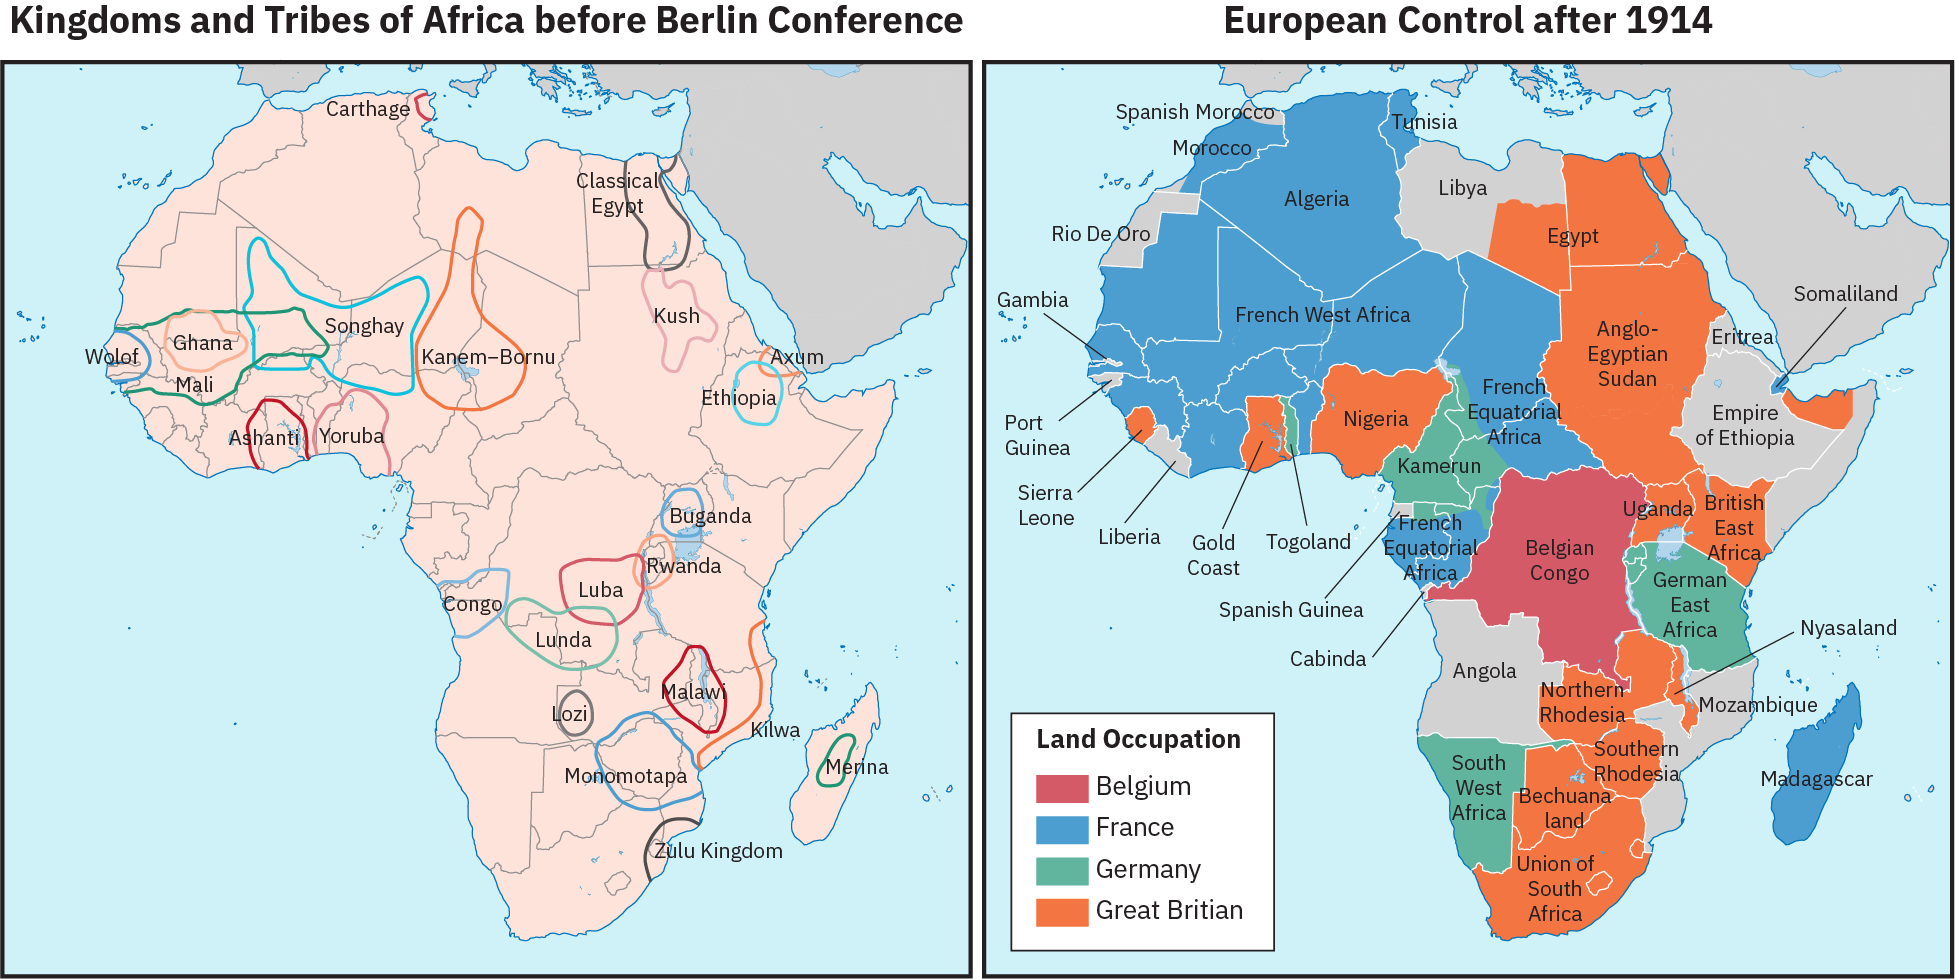 Two maps of Africa, side by the side. The map on the left is labelled “Kingdoms and Tribes of Africa before Berlin Conference.” Various territories are circled and labelled with the names of political entities such as Ashanti, Classical Egypt, Malaw, and Zulu Kingdom. These territories do not line up with contemporary state boundaries. The second map is labelled “European Control after 1914.” This map shows areas of land occupation by either Belgium, France, Germany or Great Britain, which do align with contemporary state boundaries.